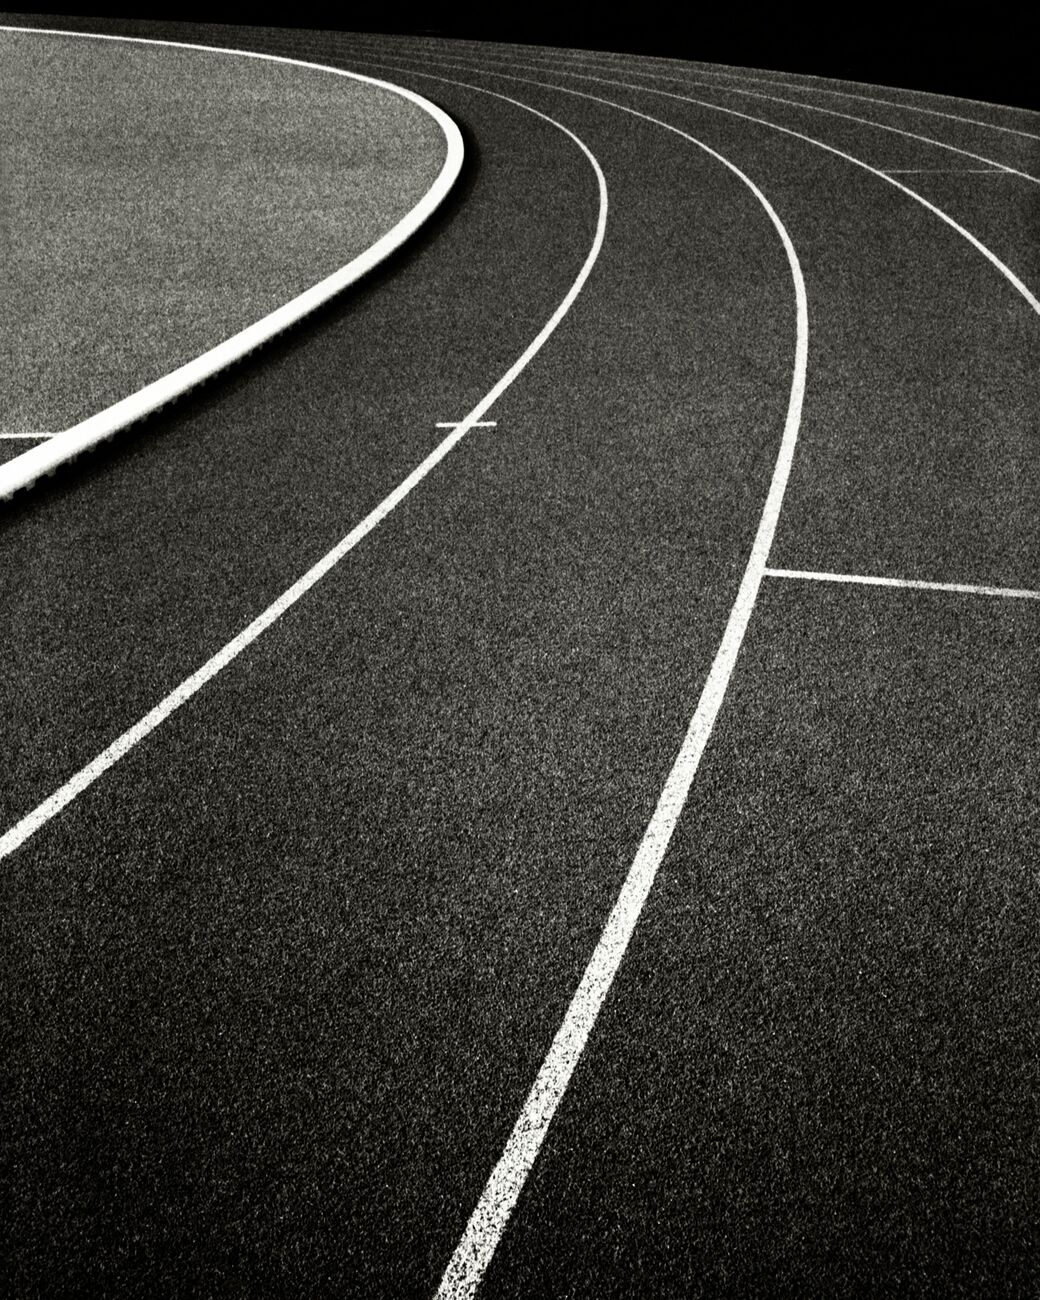 Photography 7.2 x 9.1 in, Running Track, etude 2. Ref-11644-3 - Denis Olivier Art Photography